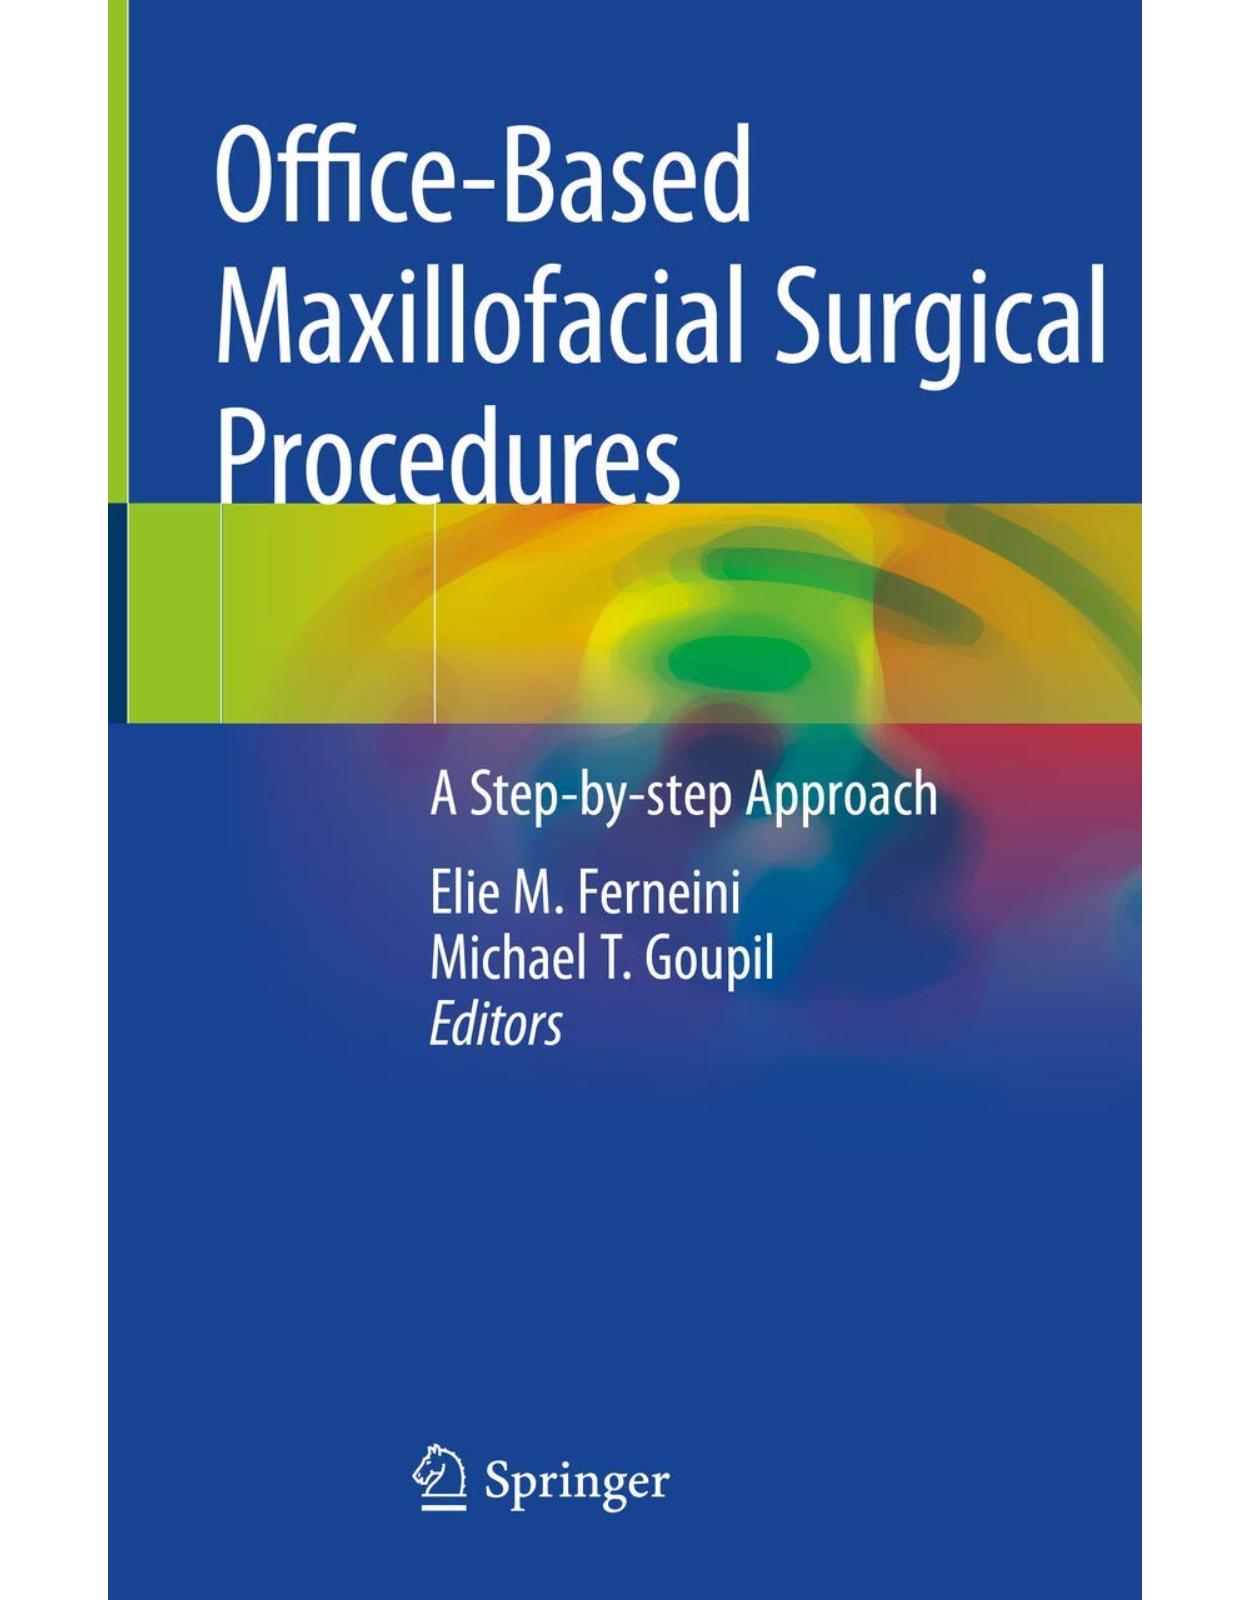 Office-Based Maxillofacial Surgical Procedures: A Step-by-step Approach